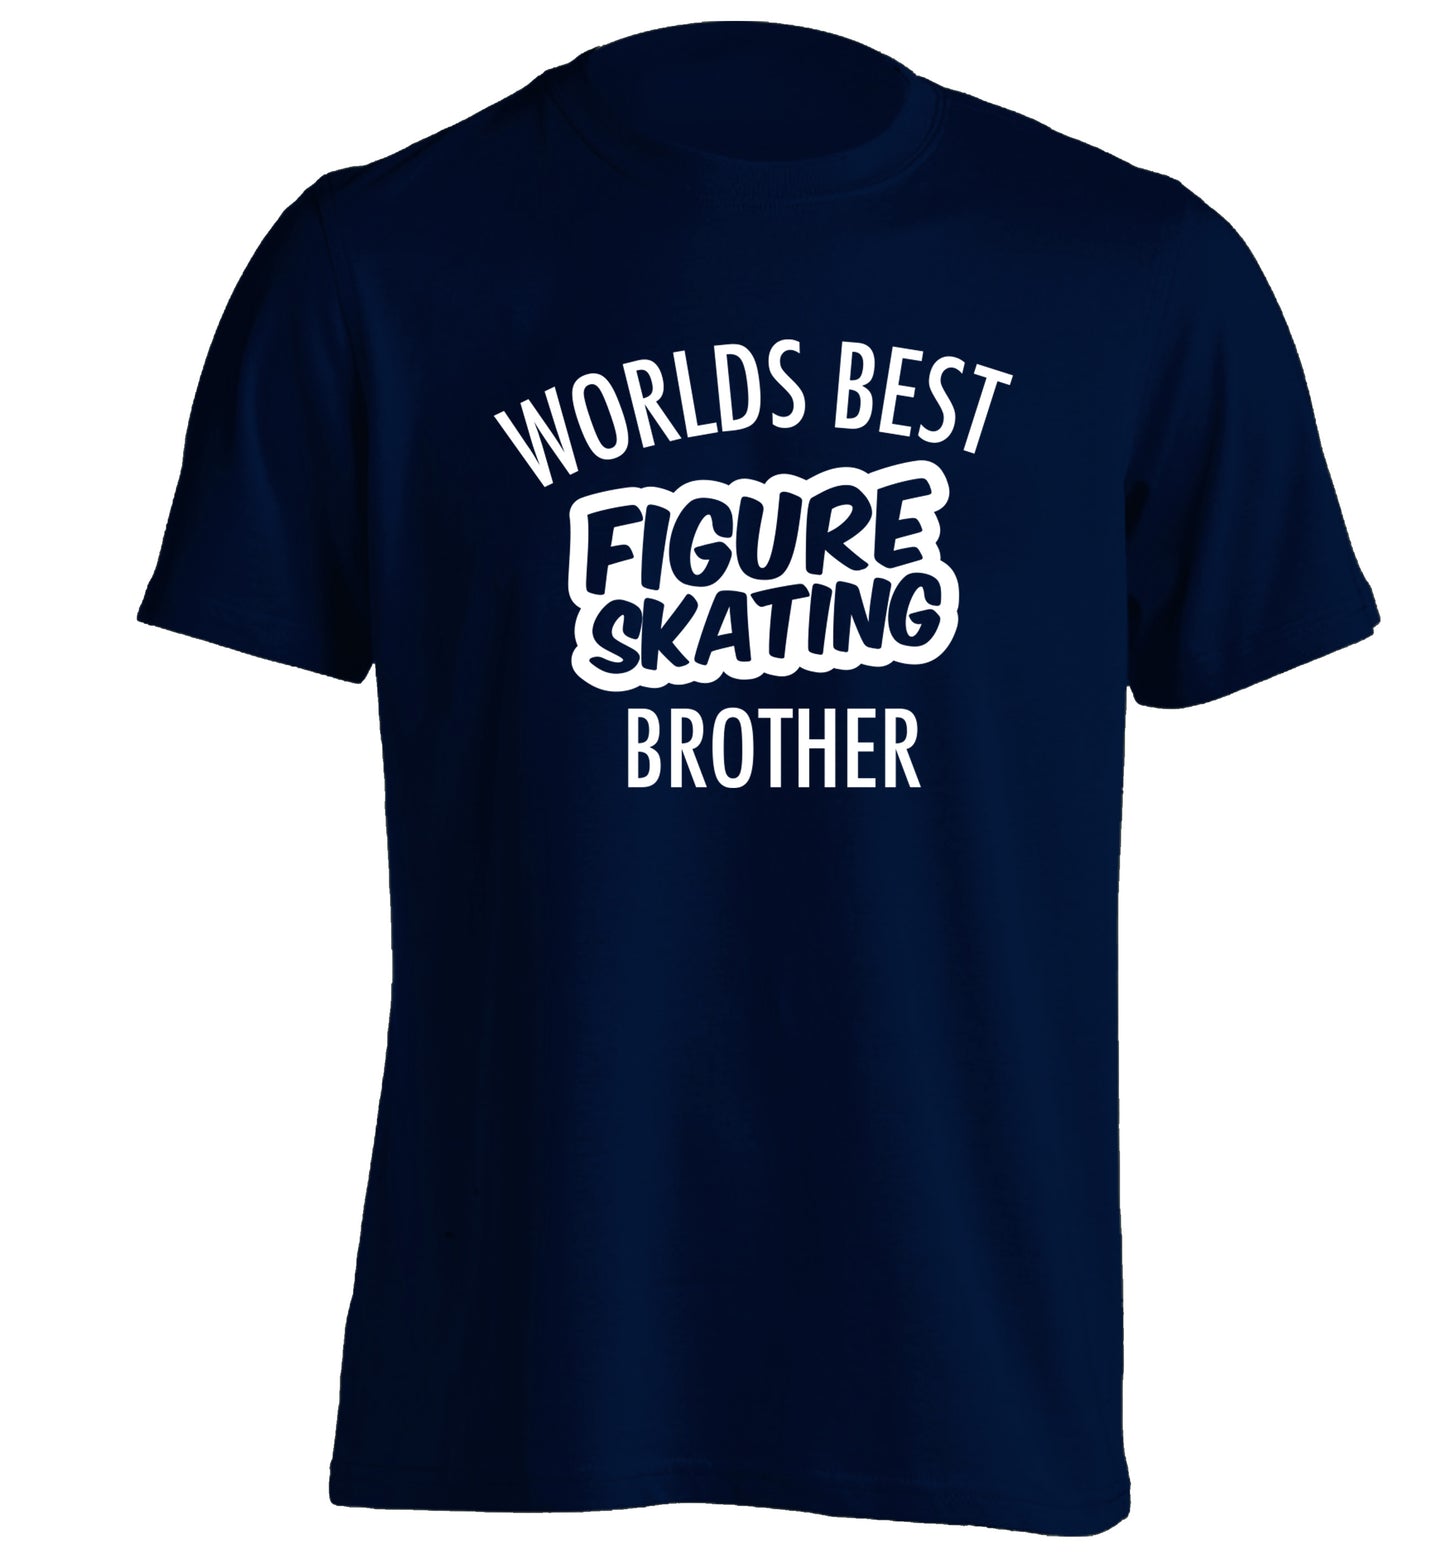 Worlds best figure skating brother adults unisexnavy Tshirt 2XL